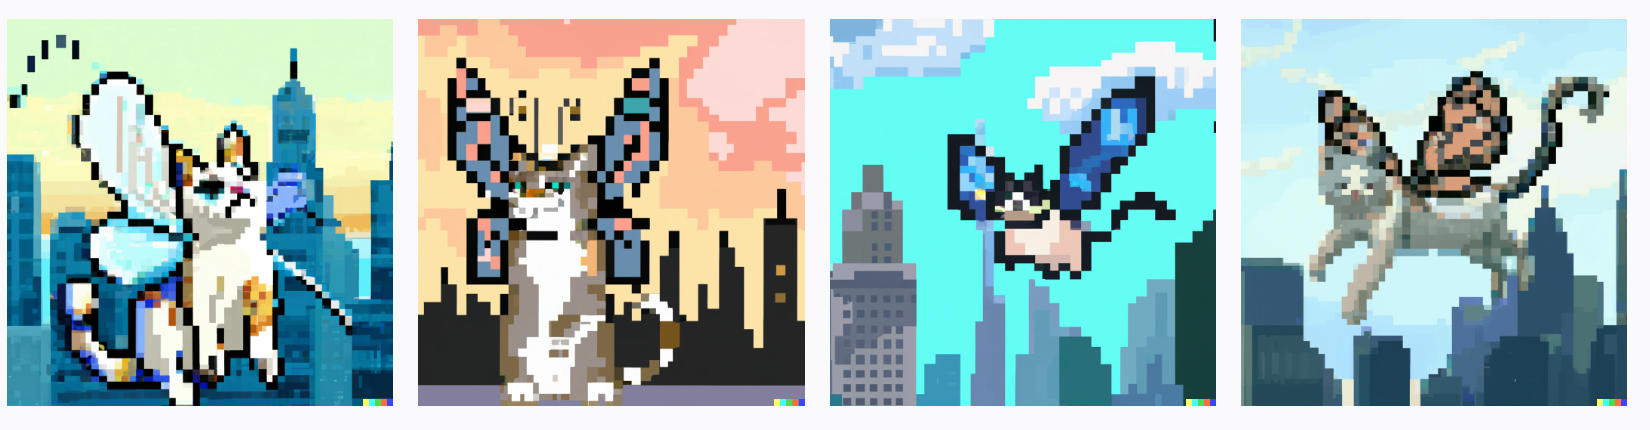 Сat with butterfly wings flying above the city, digital art, pixel art